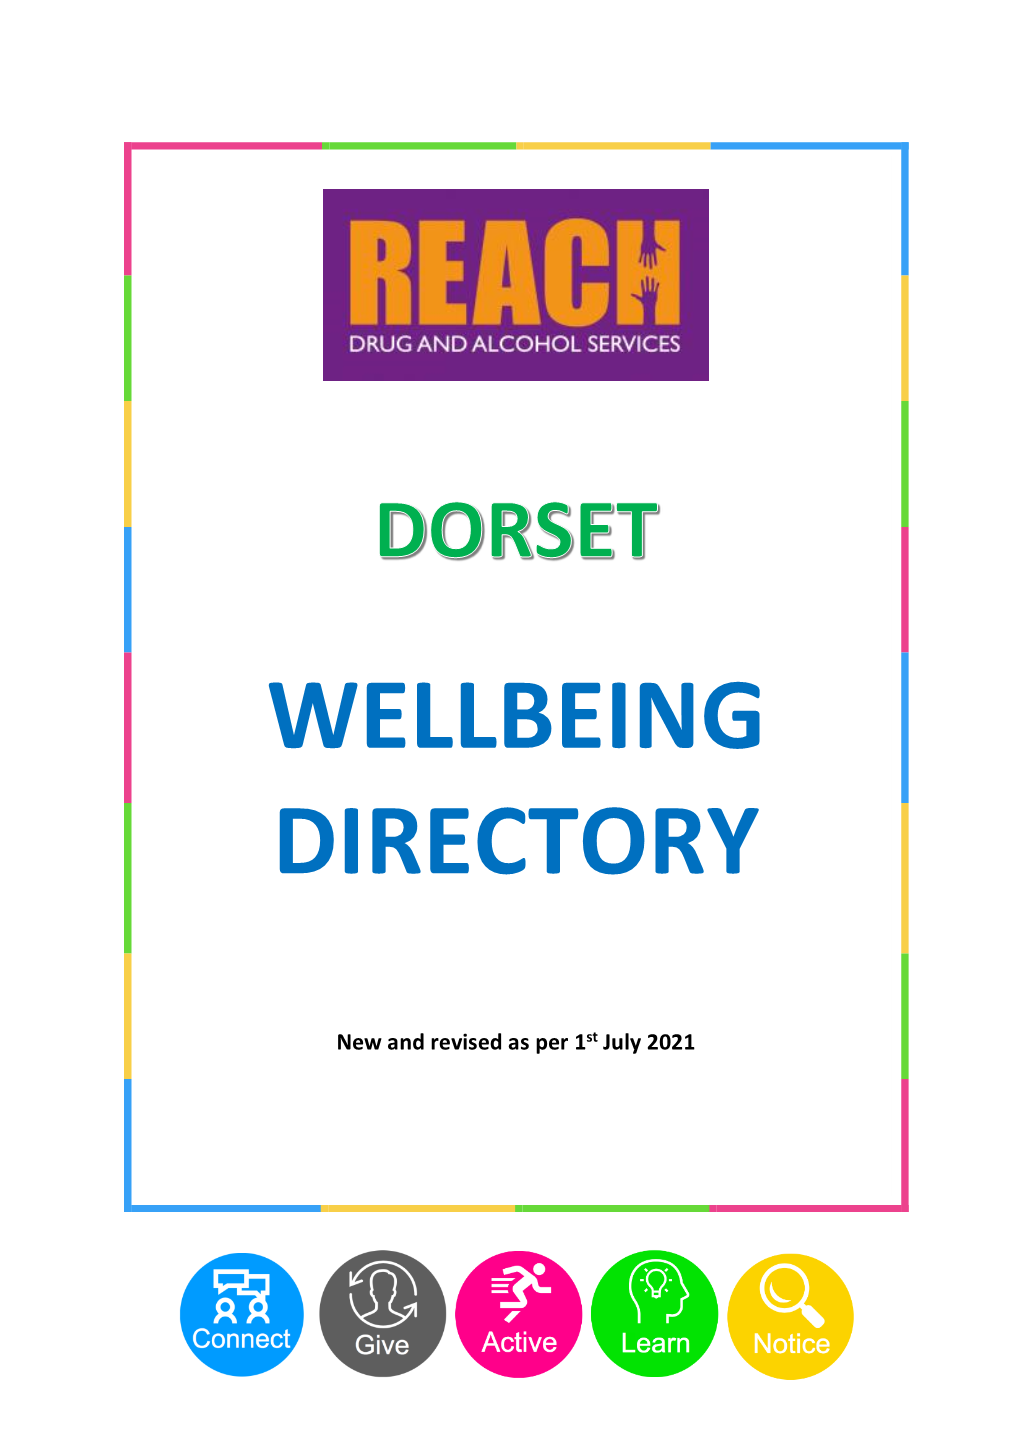 Wellbeing Directory the Sudden Changes of Routine and How We Previously Filled Our Days Is One of the Hardest Things